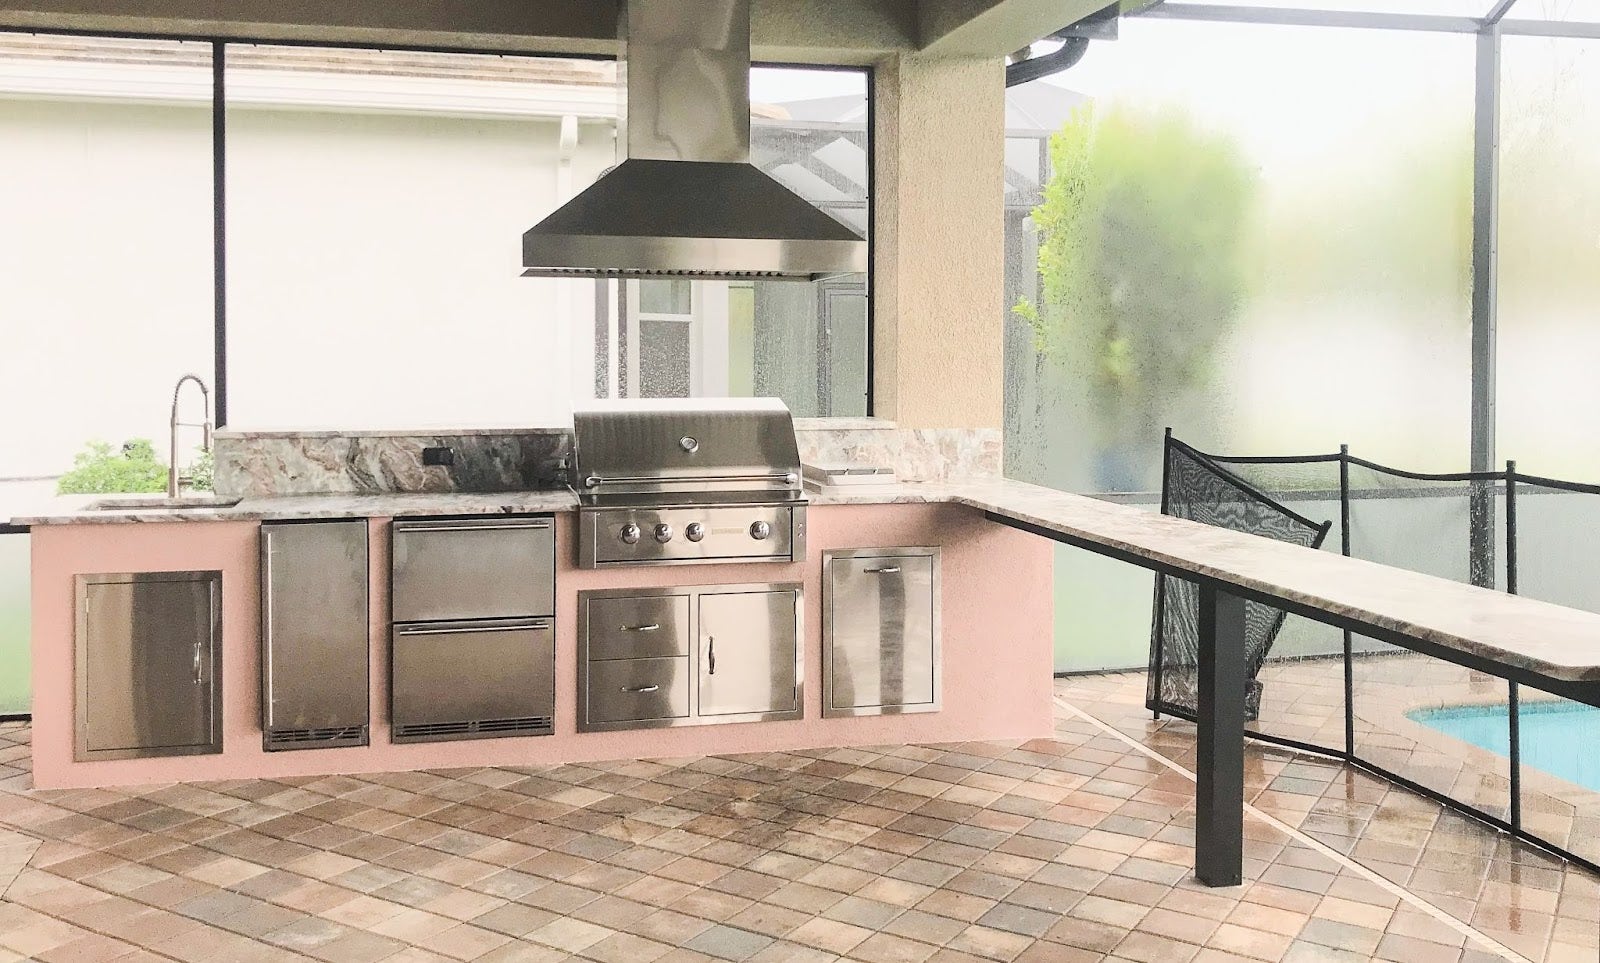 Contemporary outdoor kitchen with Proline range hood in a screened lanai with poolside view - prolinerangehoods.com